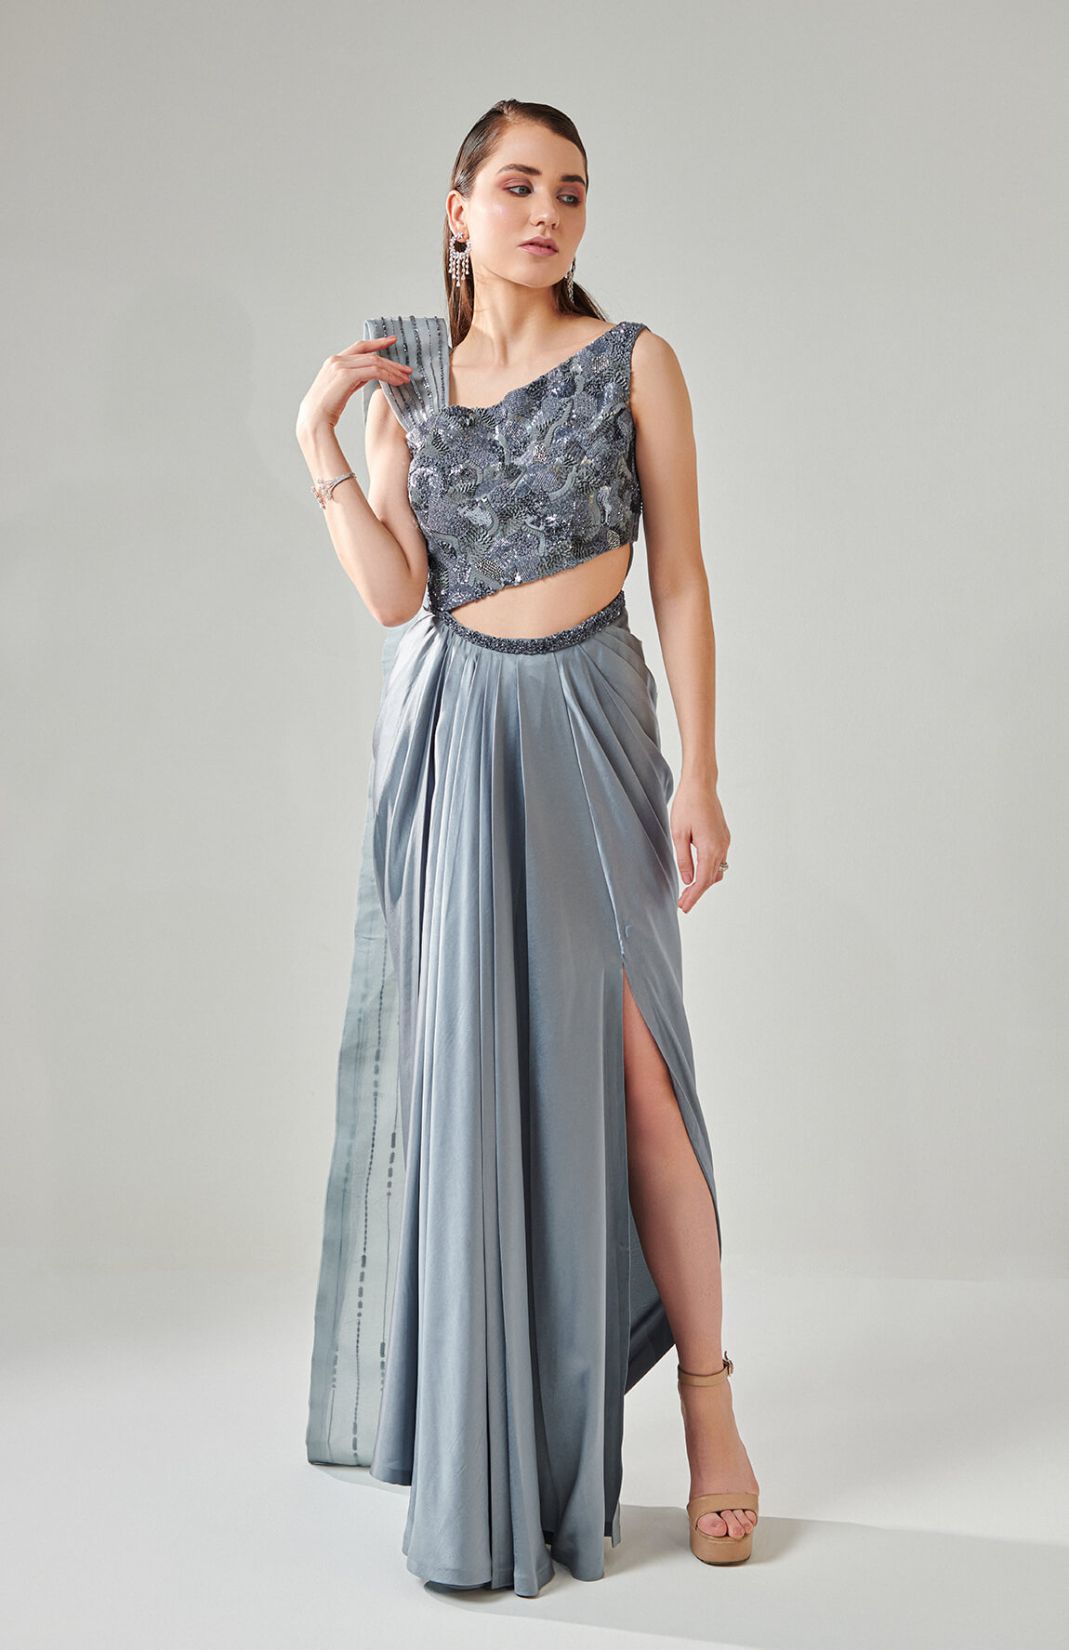 Ash Grey Drape Saree Gown With Embellished 3-D Palla